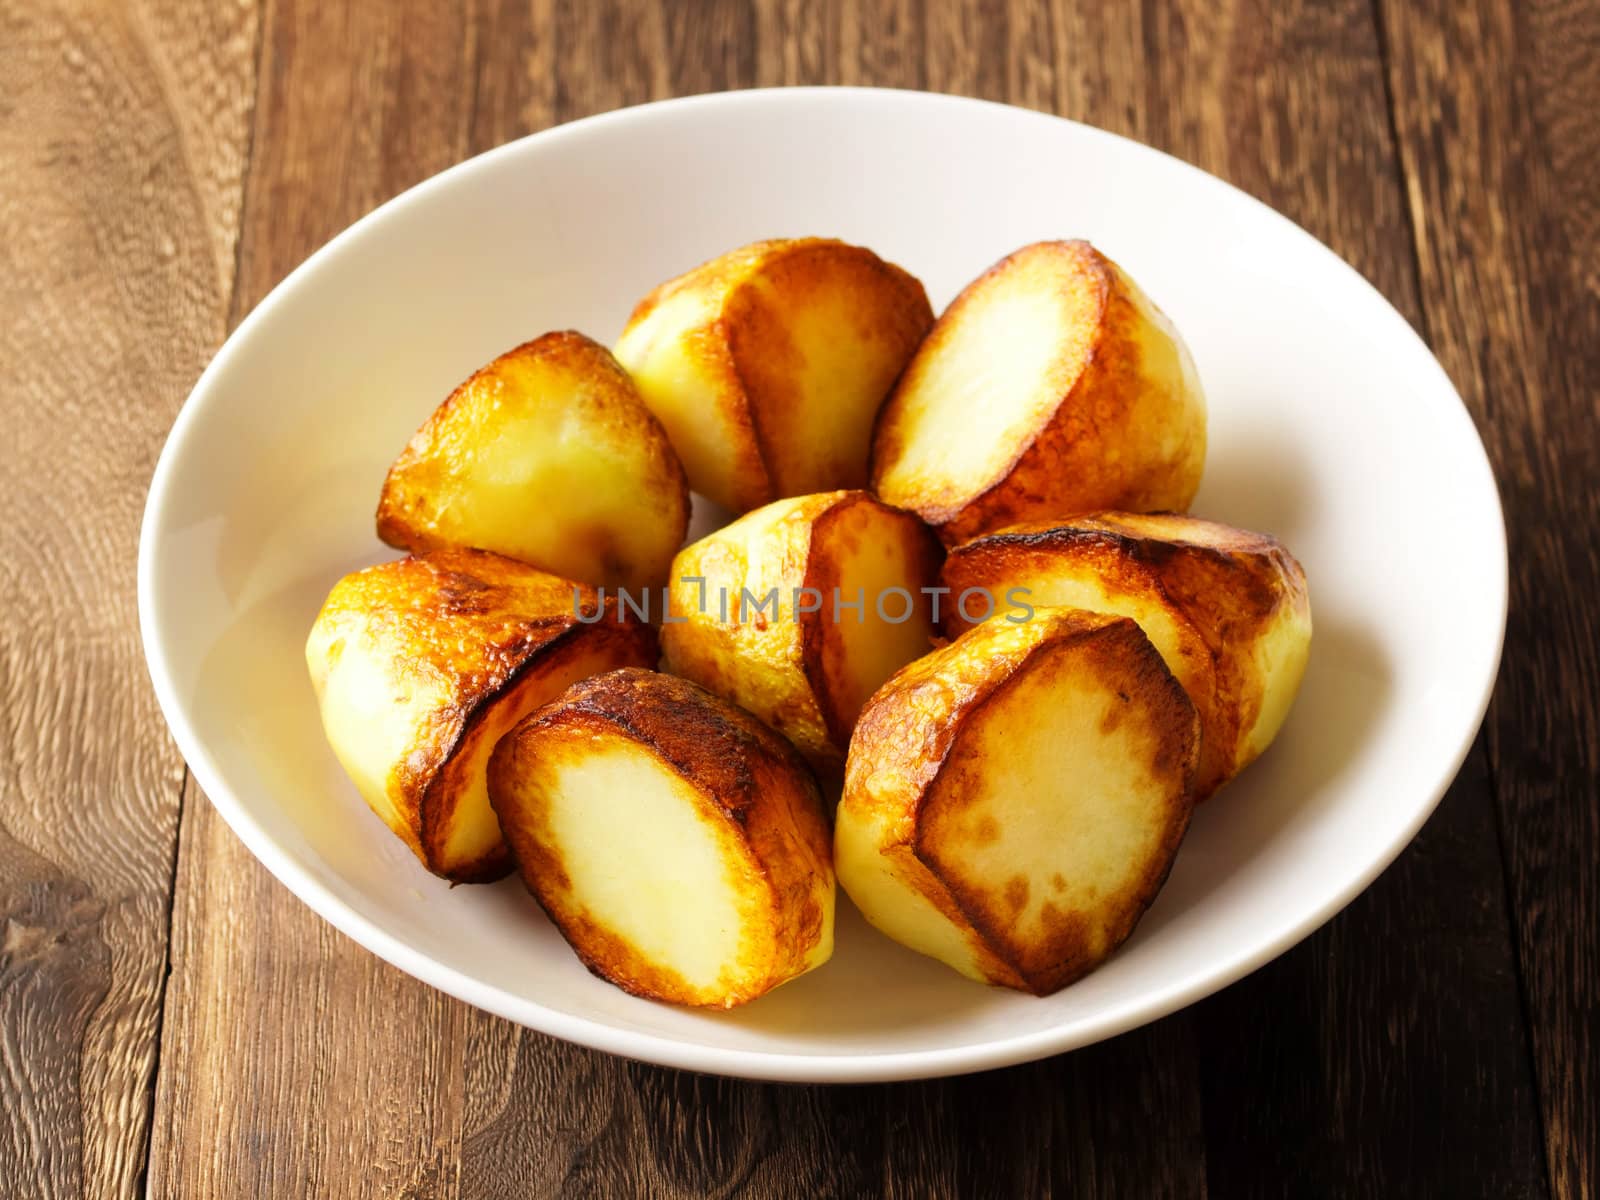 roasted potatoes by zkruger